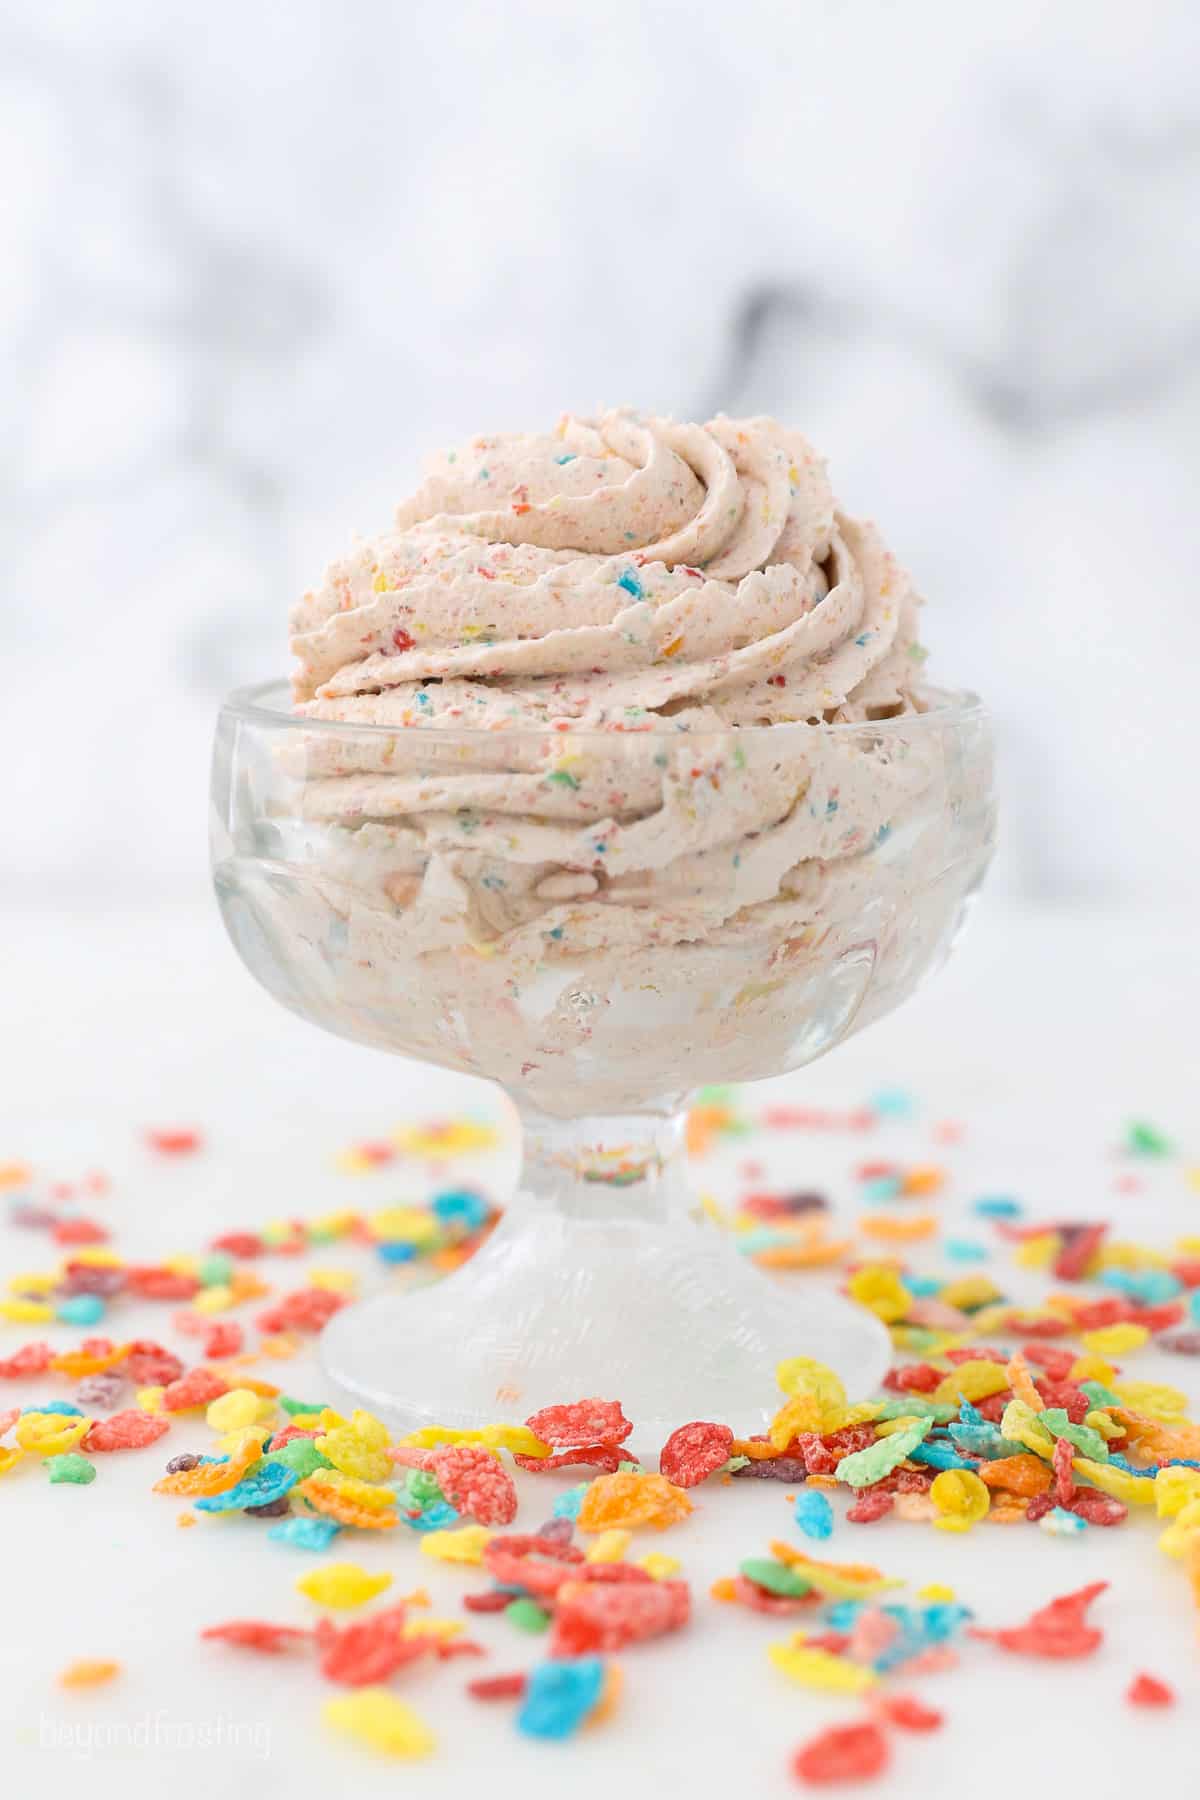 A piped swirl of cereal milk whipped cream in a glass bowl on a countertop, surrounded by Fruity Pebbles cereal.